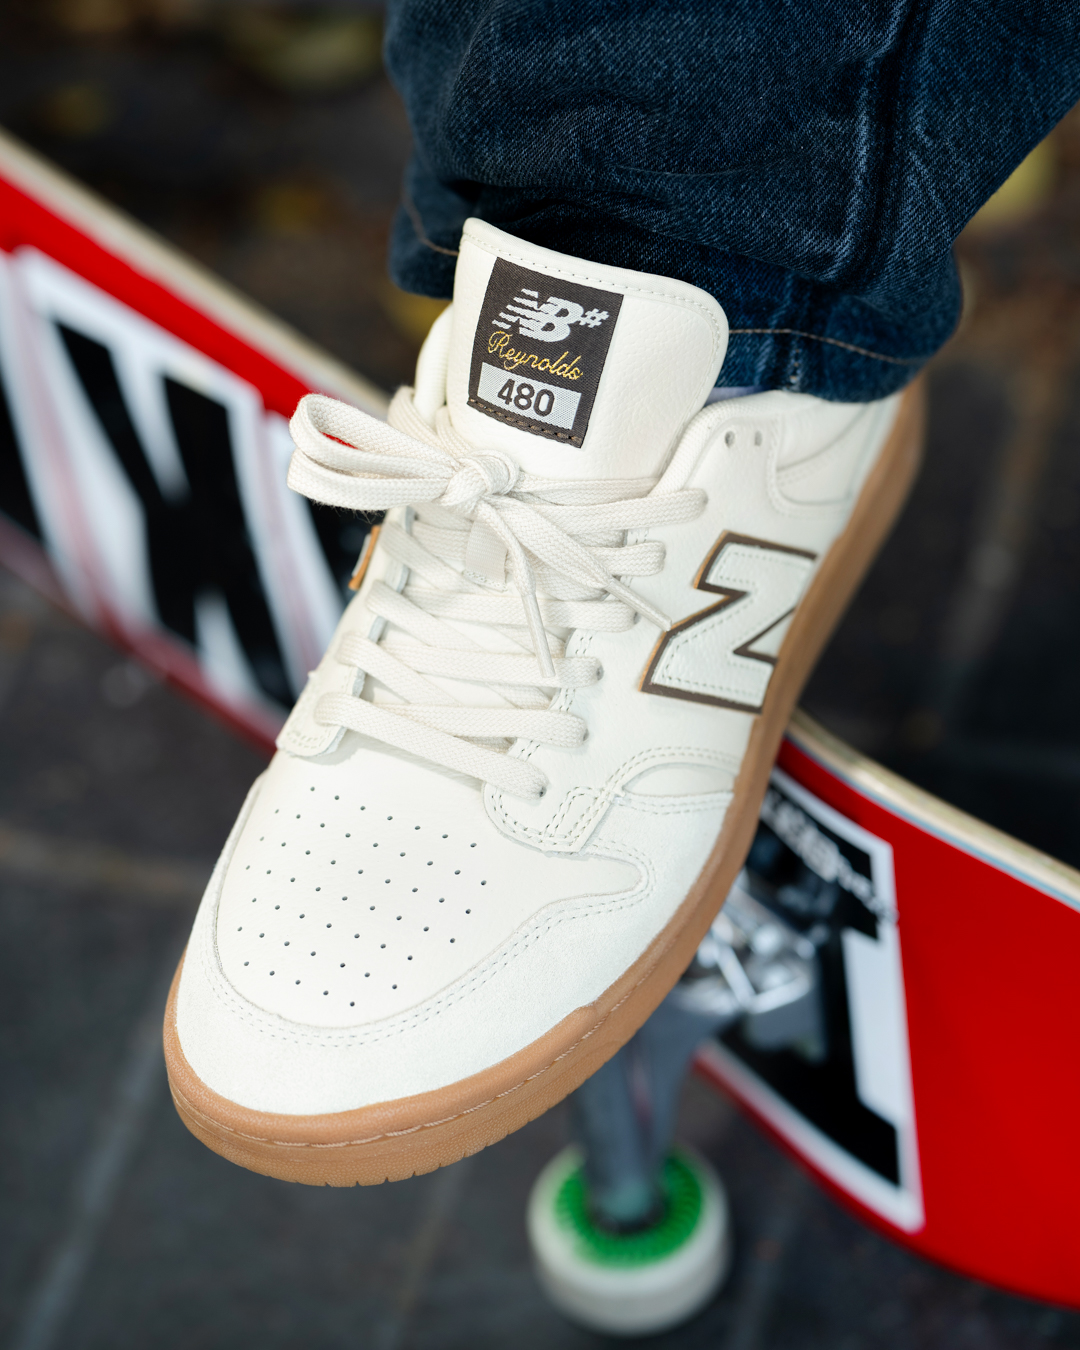 New Balance' 480 sneaker remixed by Andrew Reynolds in beige leather with a gum sole